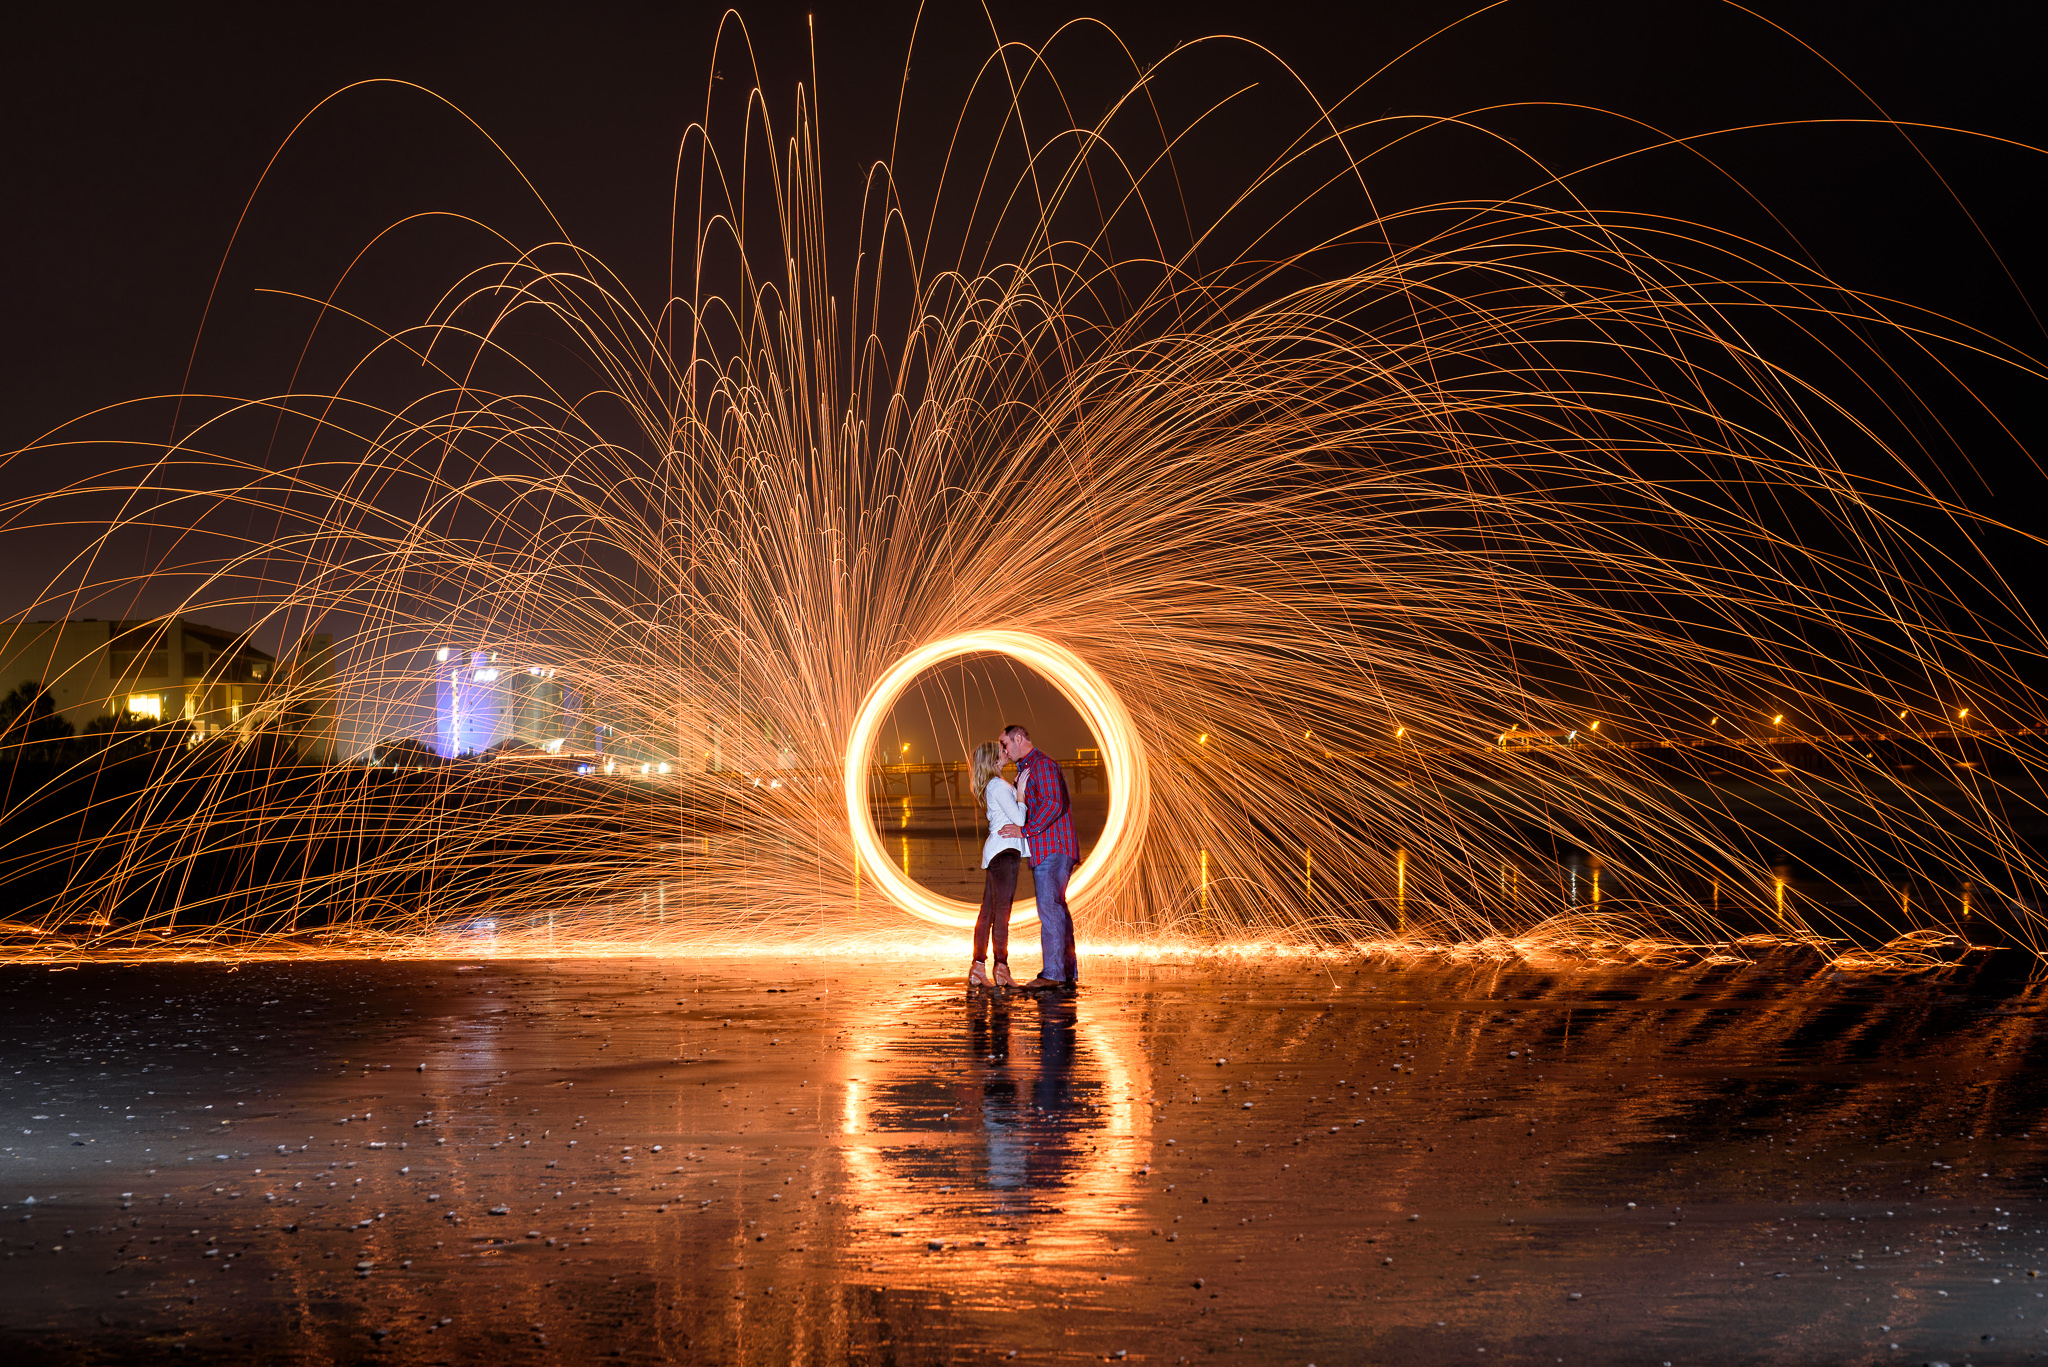 Fun with sparklers and steel wool - Springmaid Beach